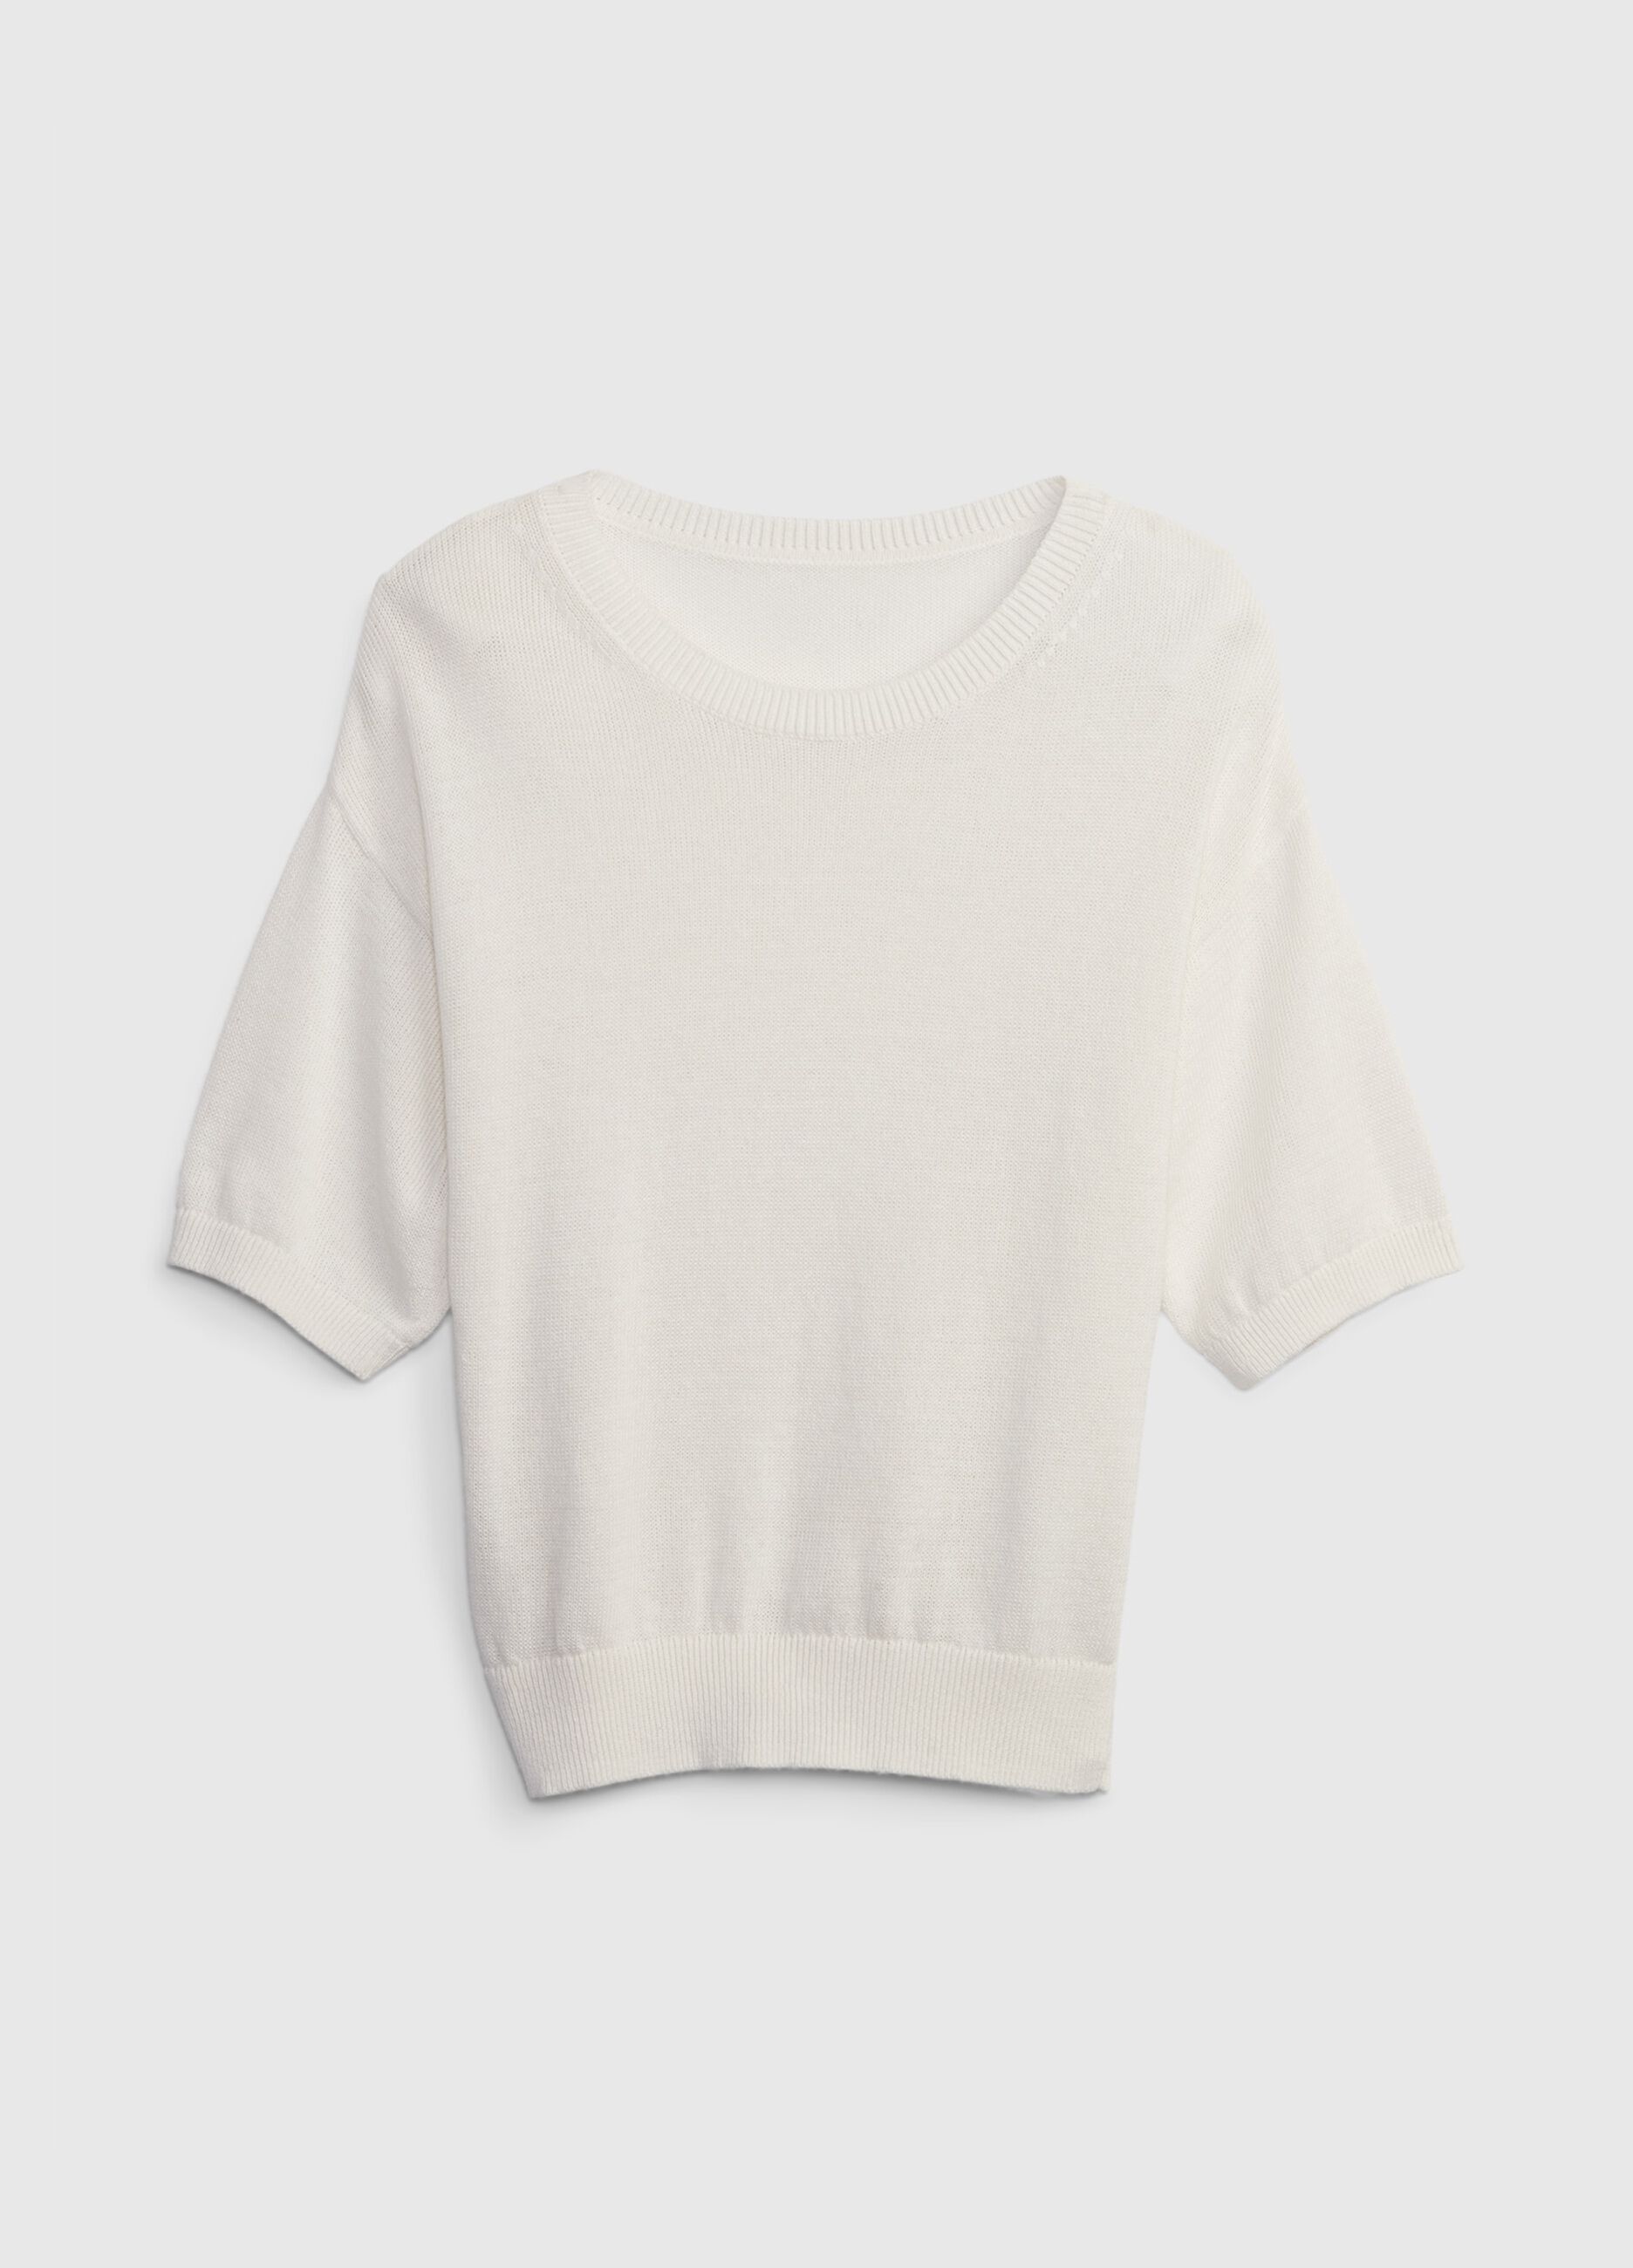 Elbow-length pullover in linen and cotton